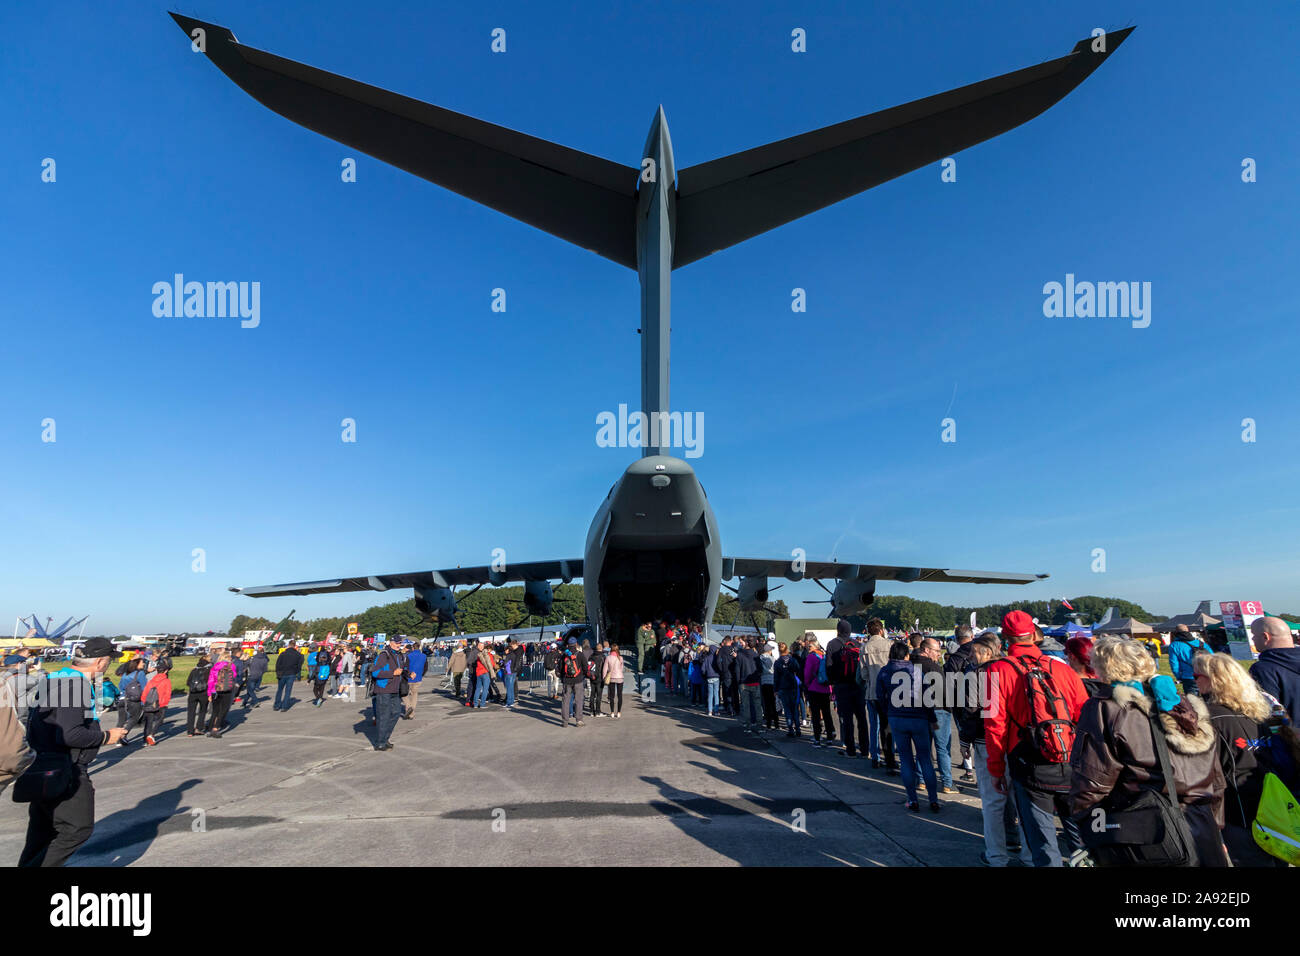 OSTRAVA, CZECH REPUBLIC - SEPTEMBER 22, 2019: NATO Days. C-5M Super Galaxy transport aircraft on display for the first time. Large crowd of visitors w Stock Photo